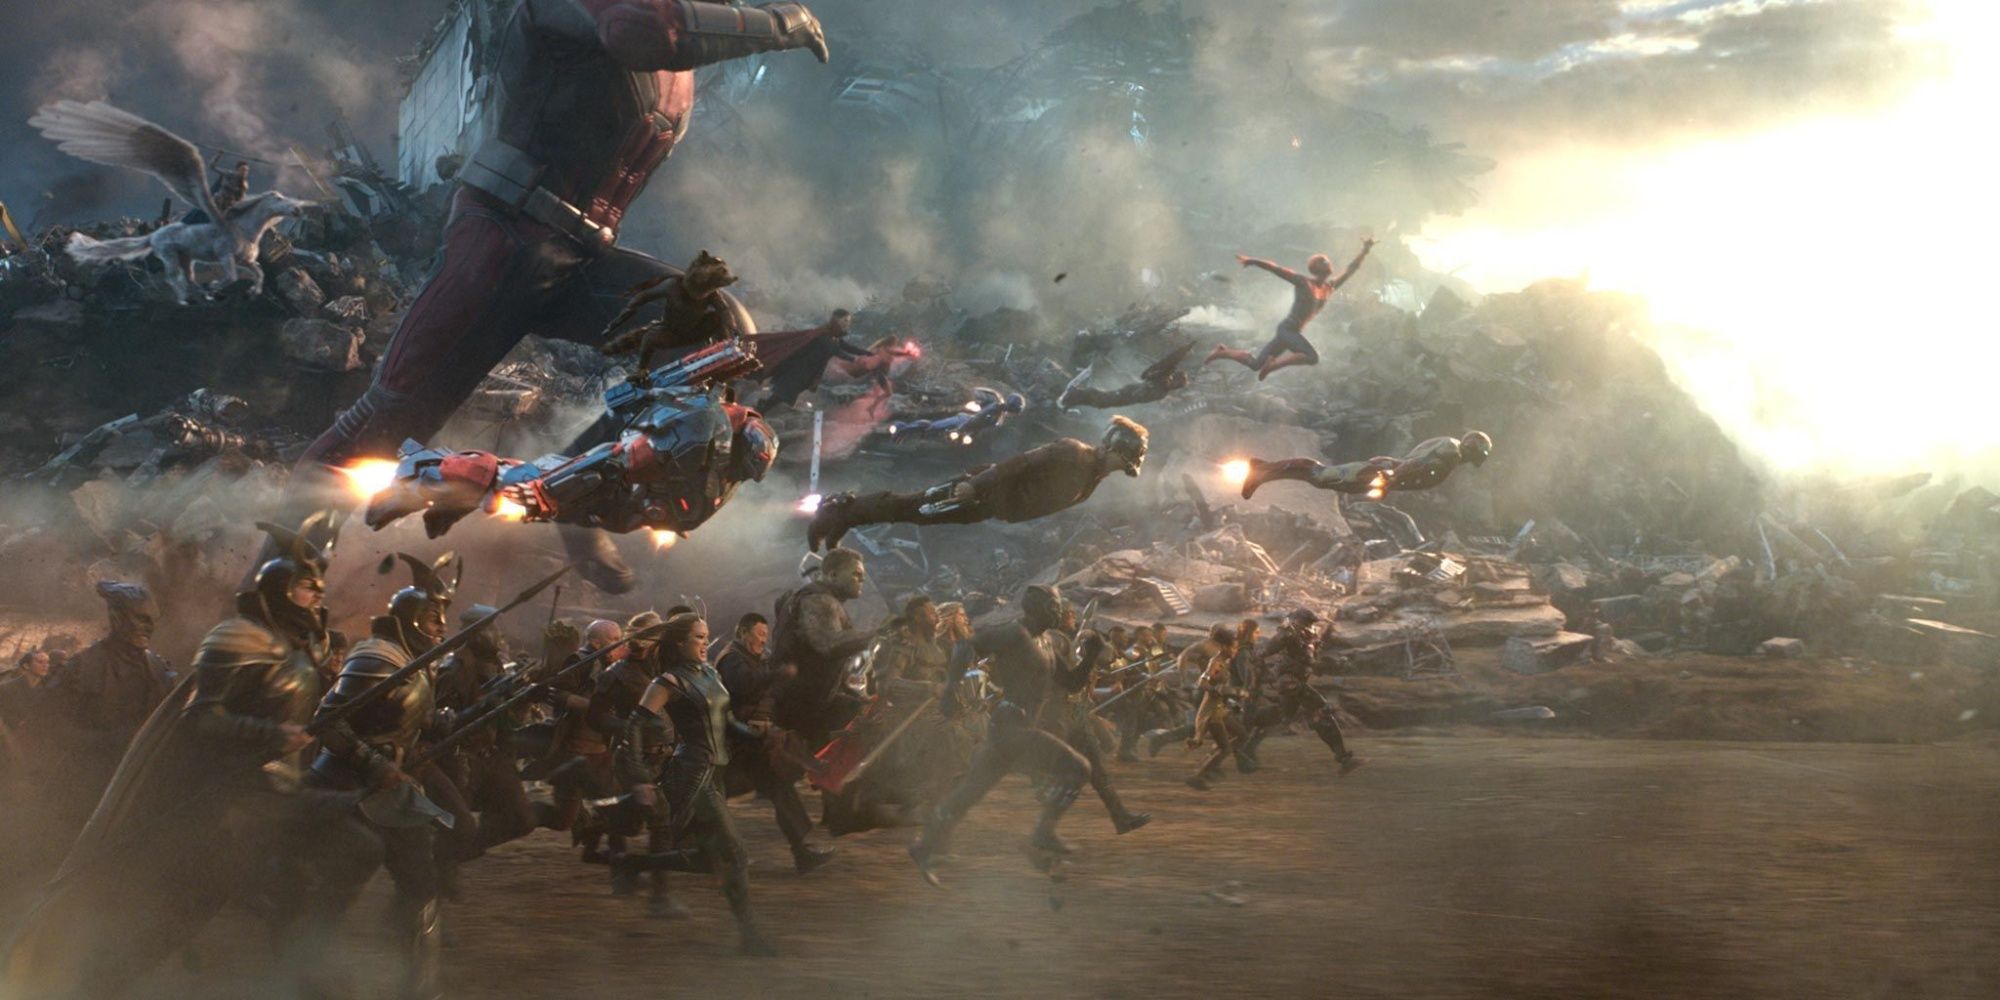 All the Avengers charging forward into battle